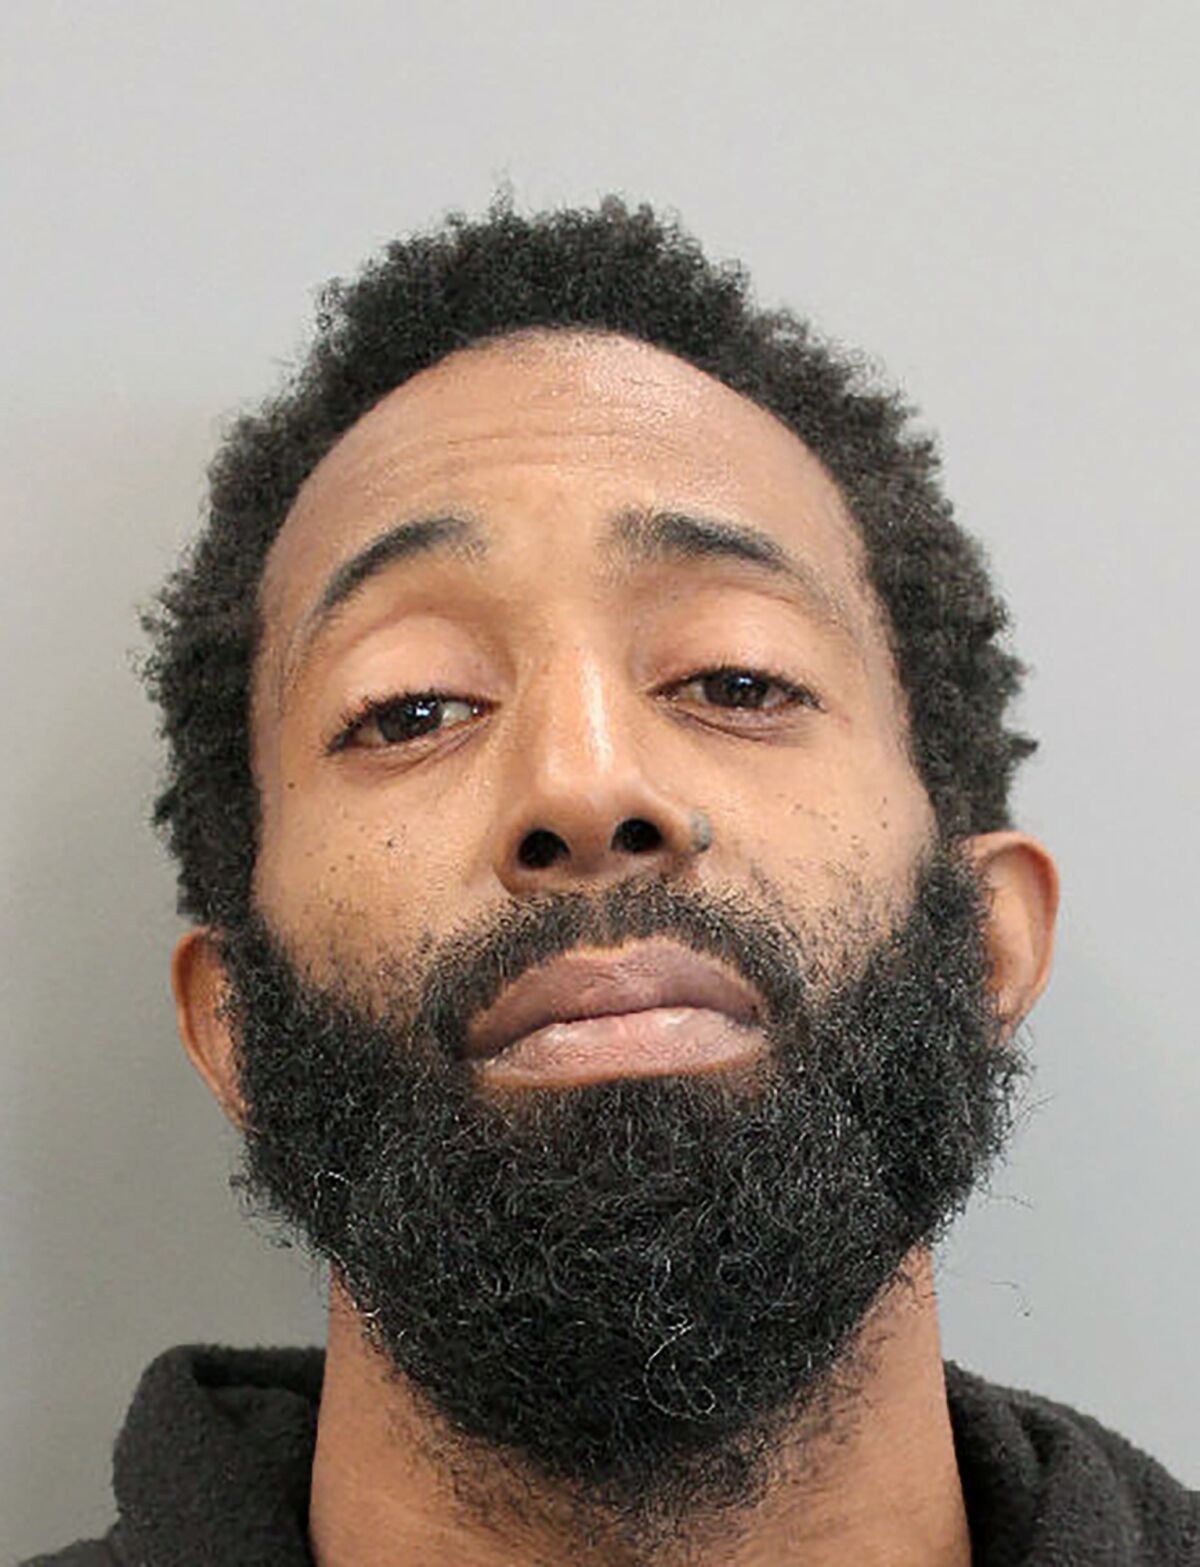 This booking photo provided by the Houston Police Department shows Tony Earls on Tuesday, Feb. 15, 2022. Houston police say Earls, who had been robbed at an ATM on Monday evening, Feb. 14, opened fire in an attempt to stop his attacker but instead shot a 9-year-old girl in a truck driving nearby. The girl later died at a hospital. (Houston Police Department via AP)